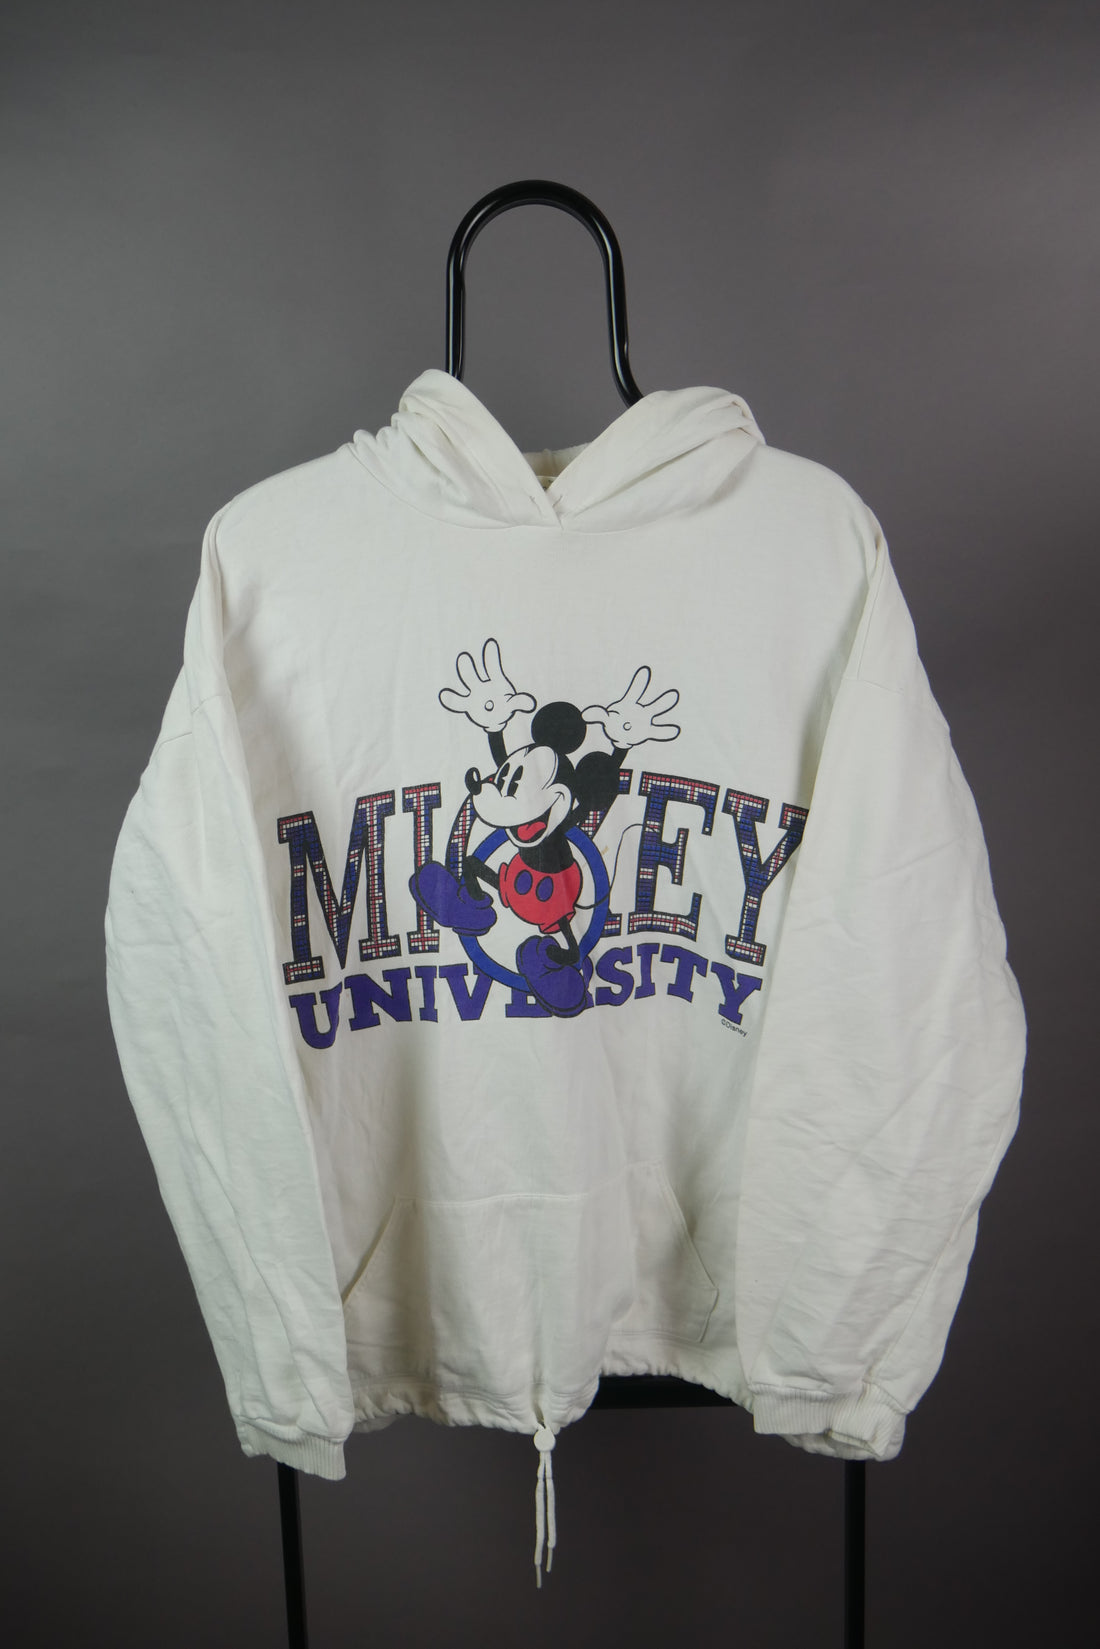 The Vintage Mickey University Hoodie with Drawstring (L)